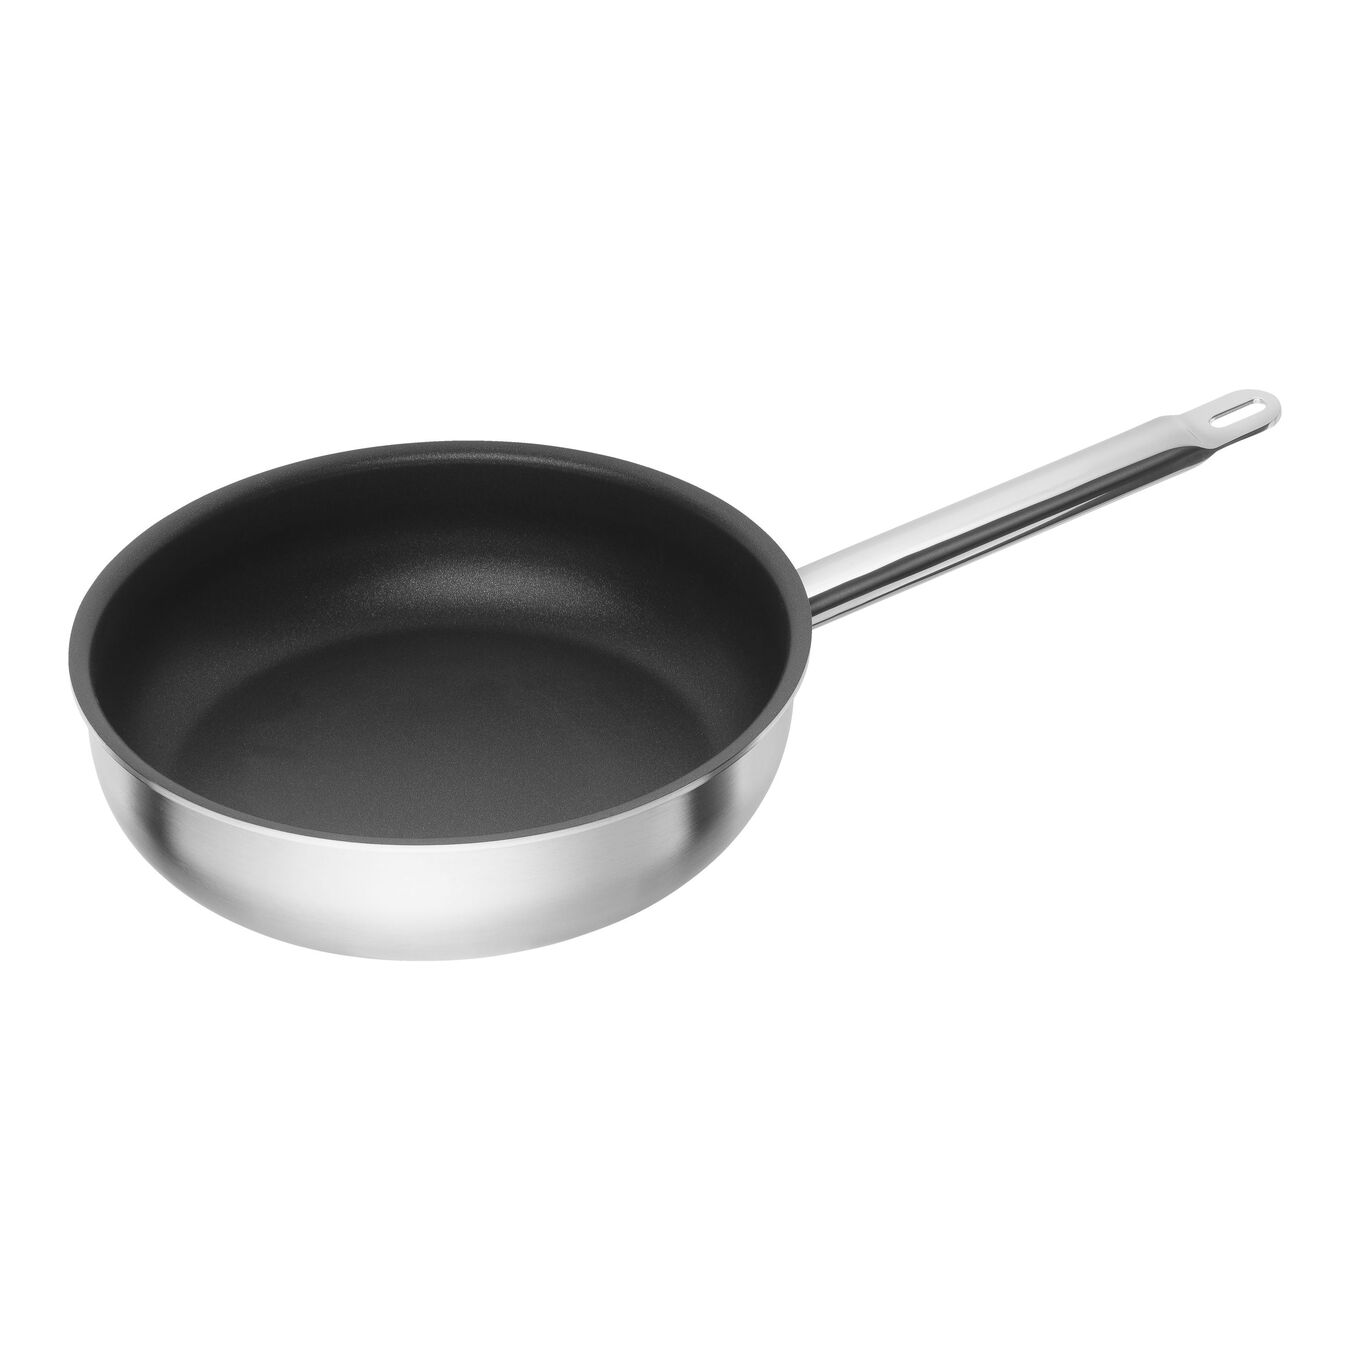 26 cm 18/10 Stainless Steel Frying pan,,large 1